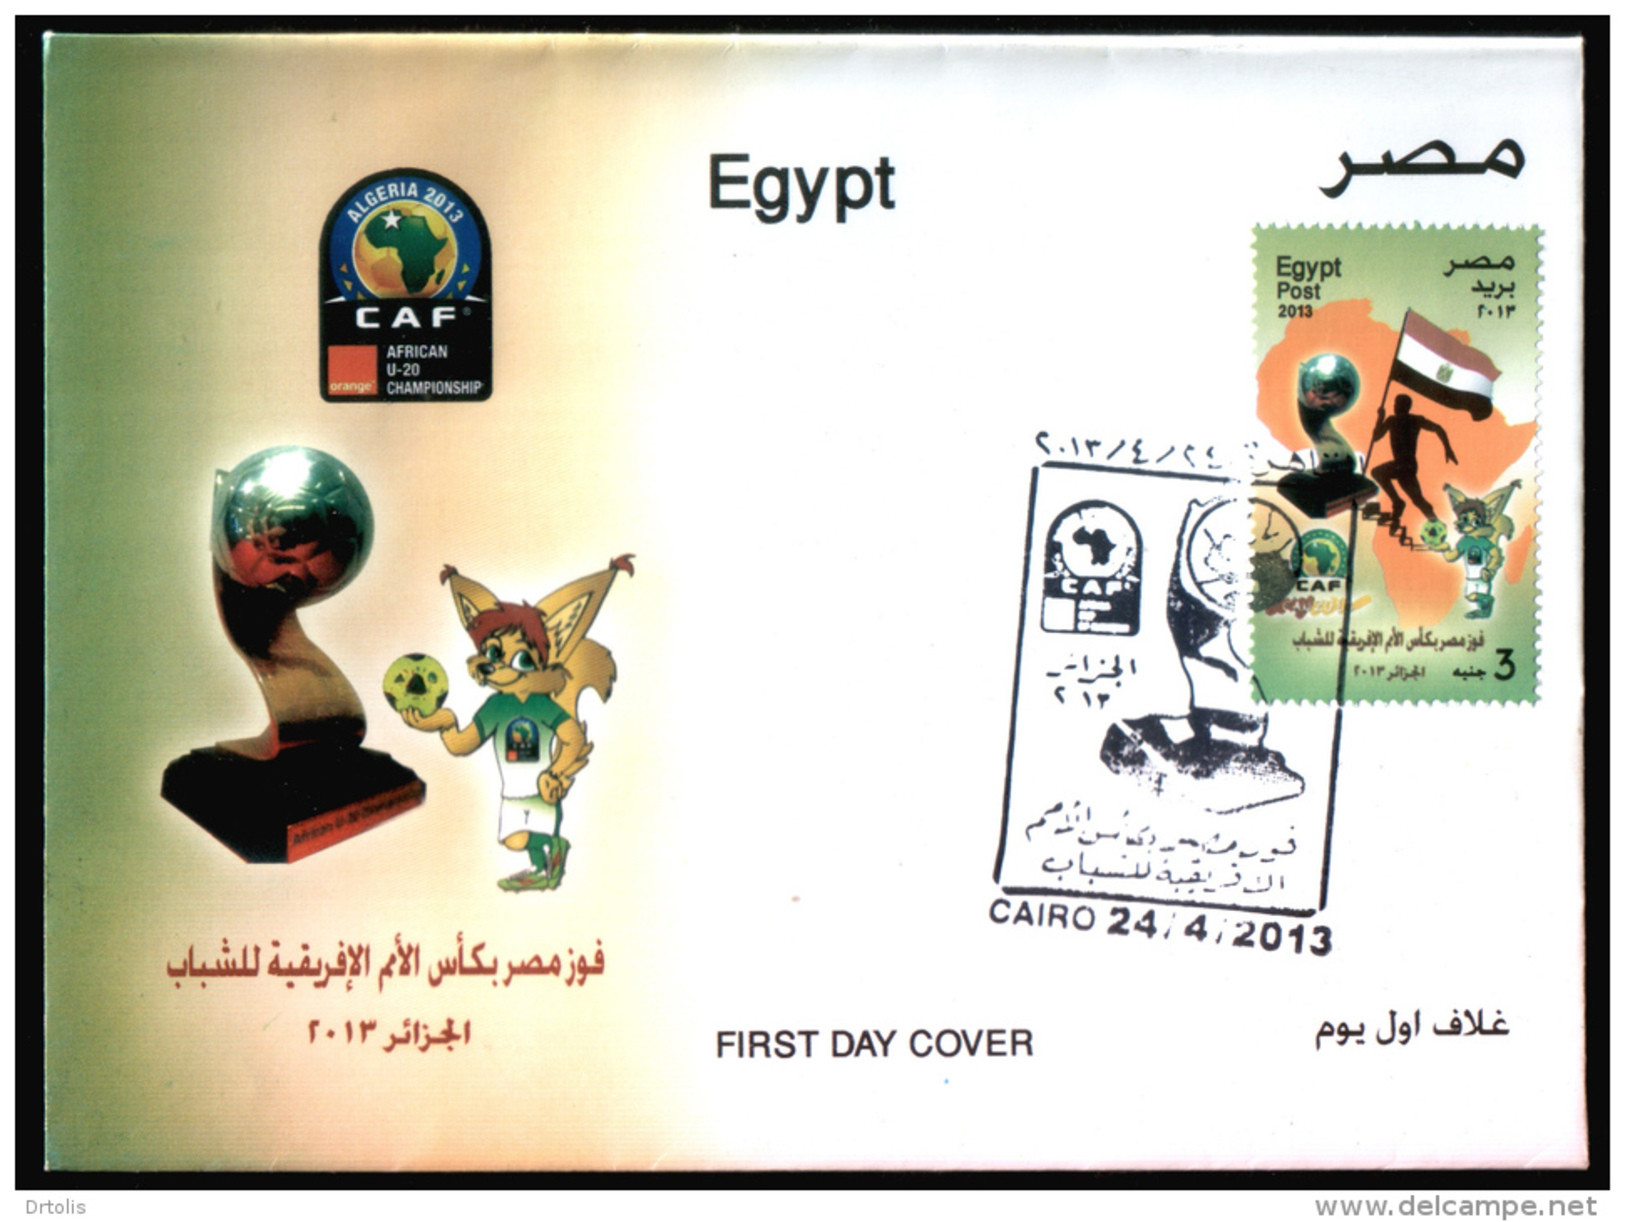 EGYPT / 2013 / SPORT / FOOTBALL / CAF / AFRICA CUP OF NATIONS SOCCER TOURNAMENT FOR YOUTH ; ALGERIA / MAP / FLAG / FDC - Brieven En Documenten